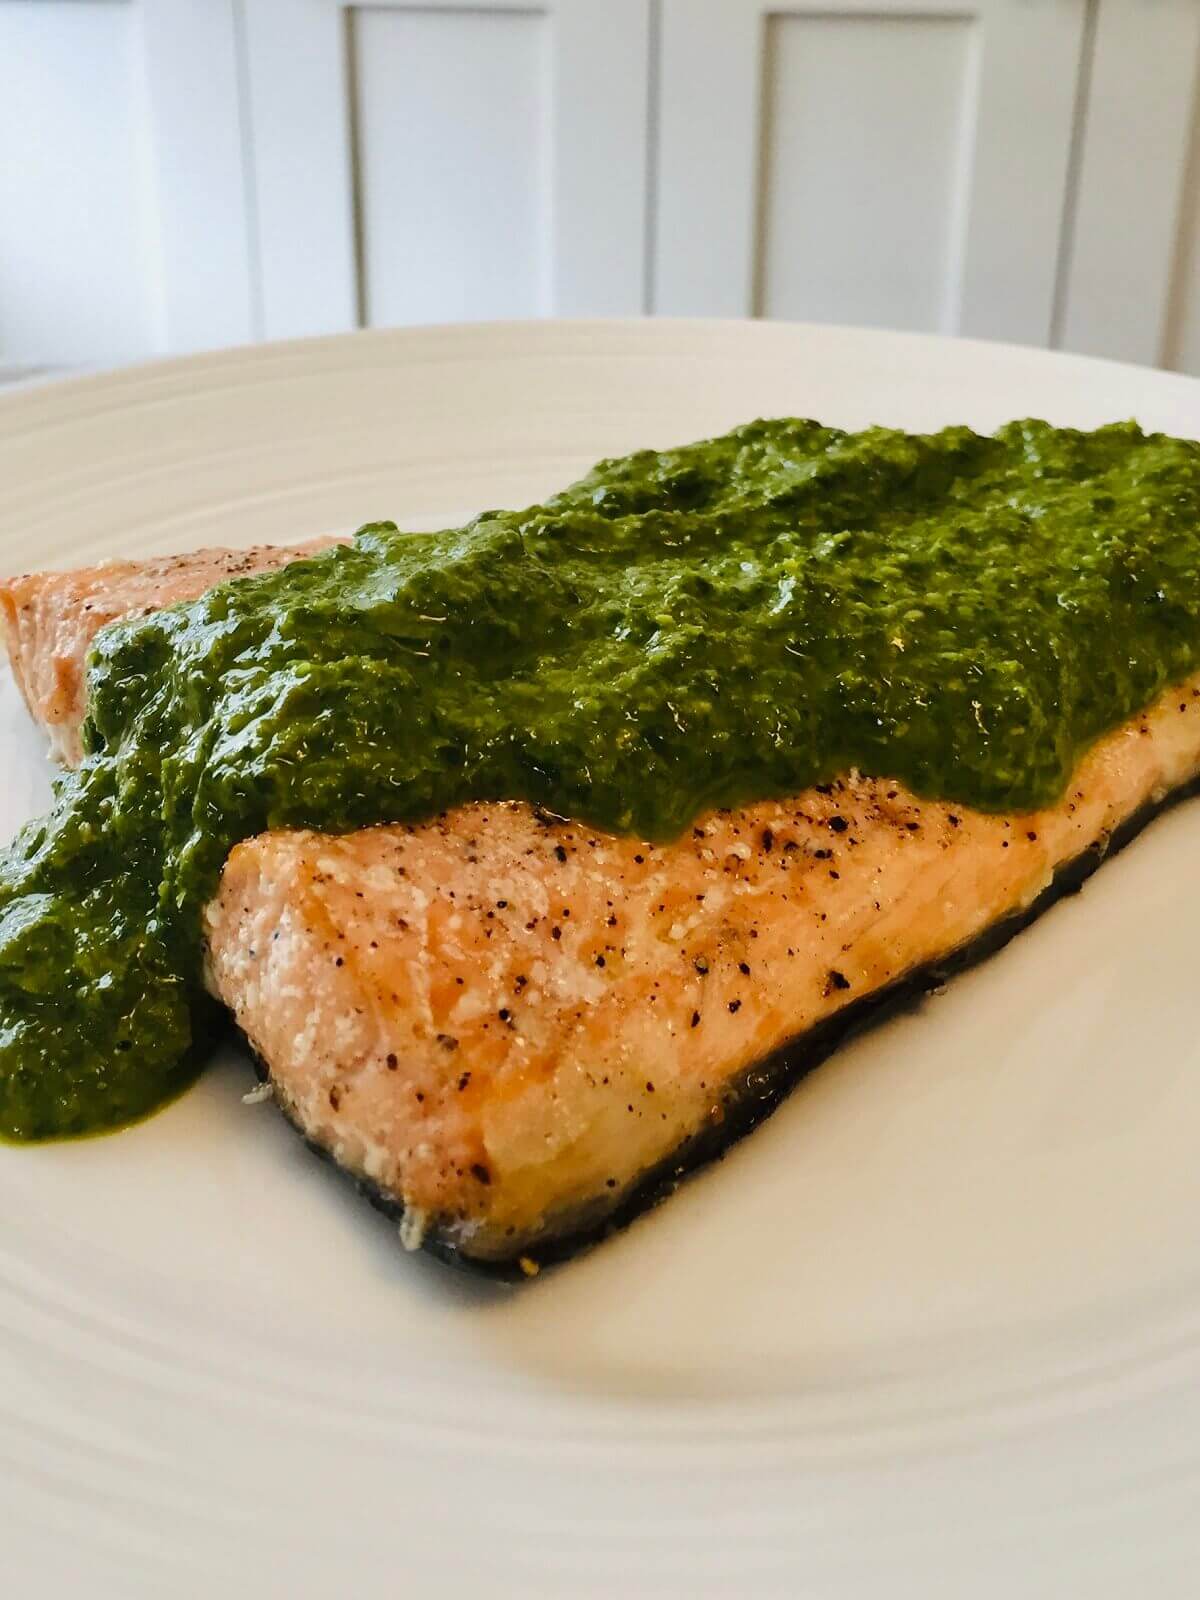 A piece of fish smothered in a green sauce.